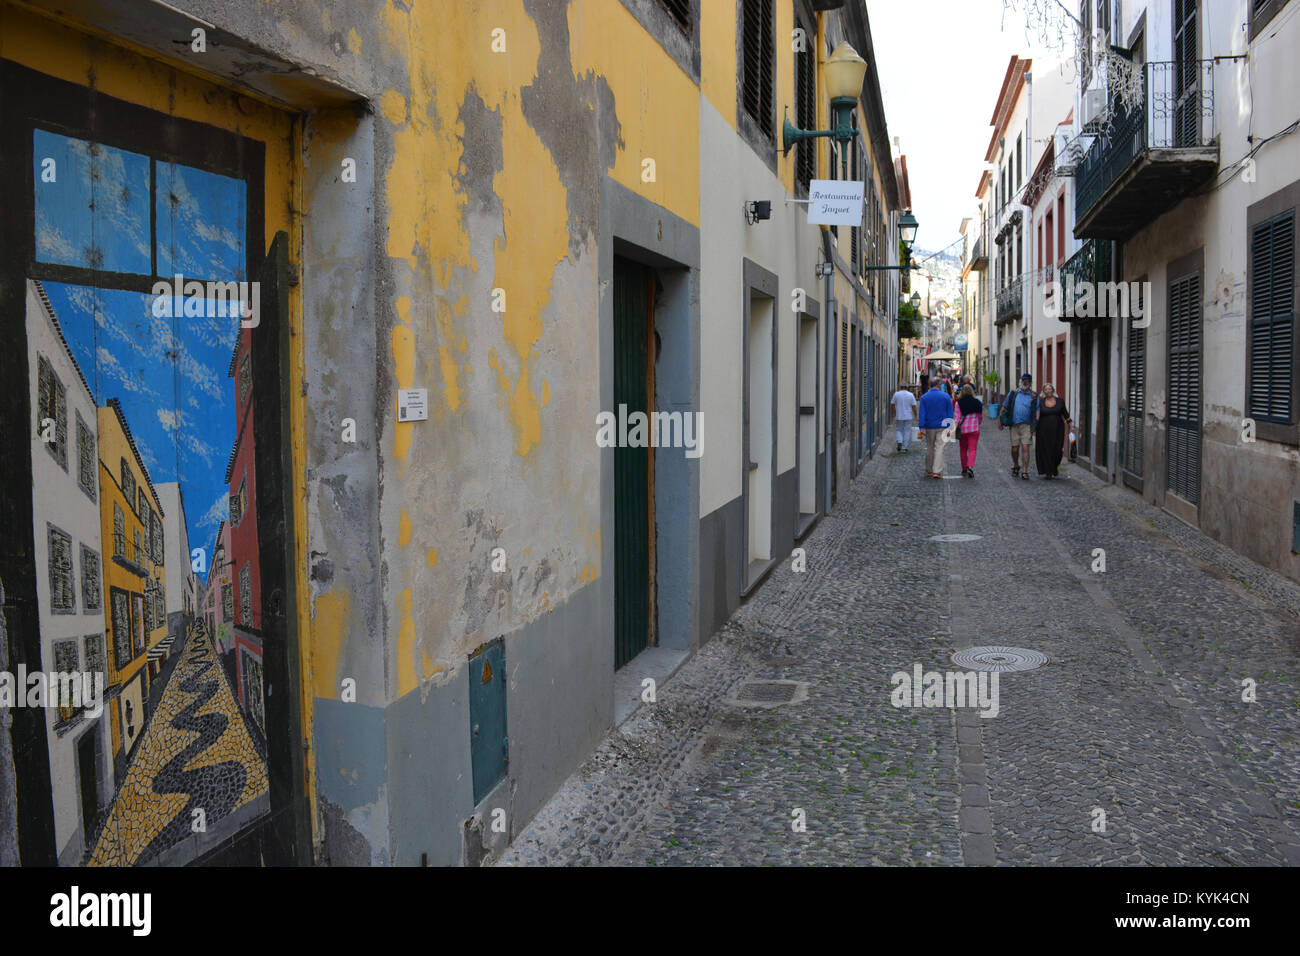 Painted doors in Rua de Santa Maria, a public art space to revitalise an old, neglected street in the Old Town of Funchal, Madeira, Portugal Stock Photo